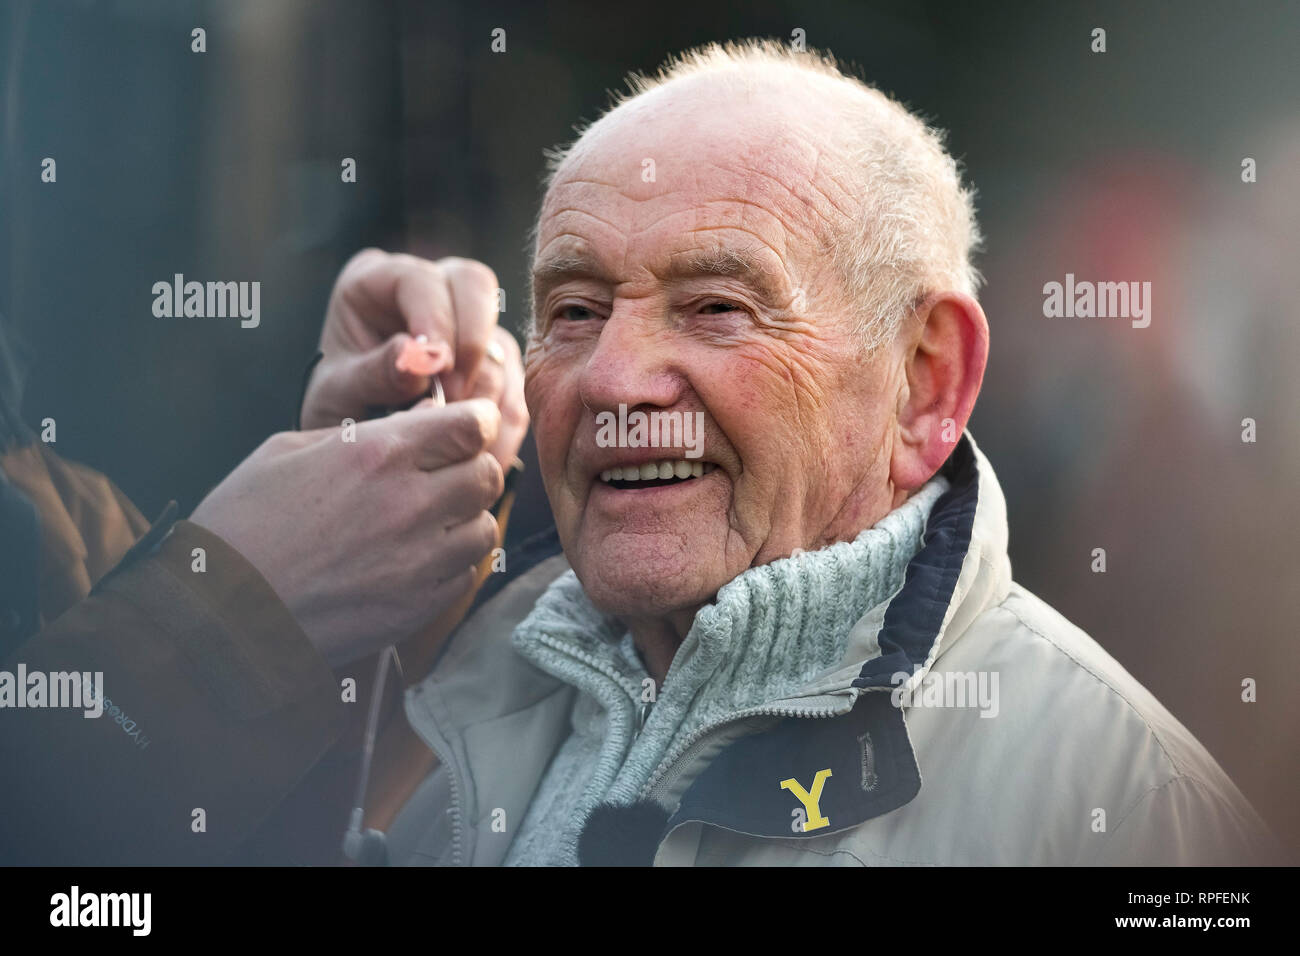 Sheffield, South Yorkshire, UK. 22nd Feb, 2019. Tony Foulds attends the Mi Amigo flypast at Endcliffe Park, Sheffield, South Yorkshire, UK. 22nd February 2019. Photograph by Richard Holmes. Credit: Richard Holmes/Alamy Live News Stock Photo